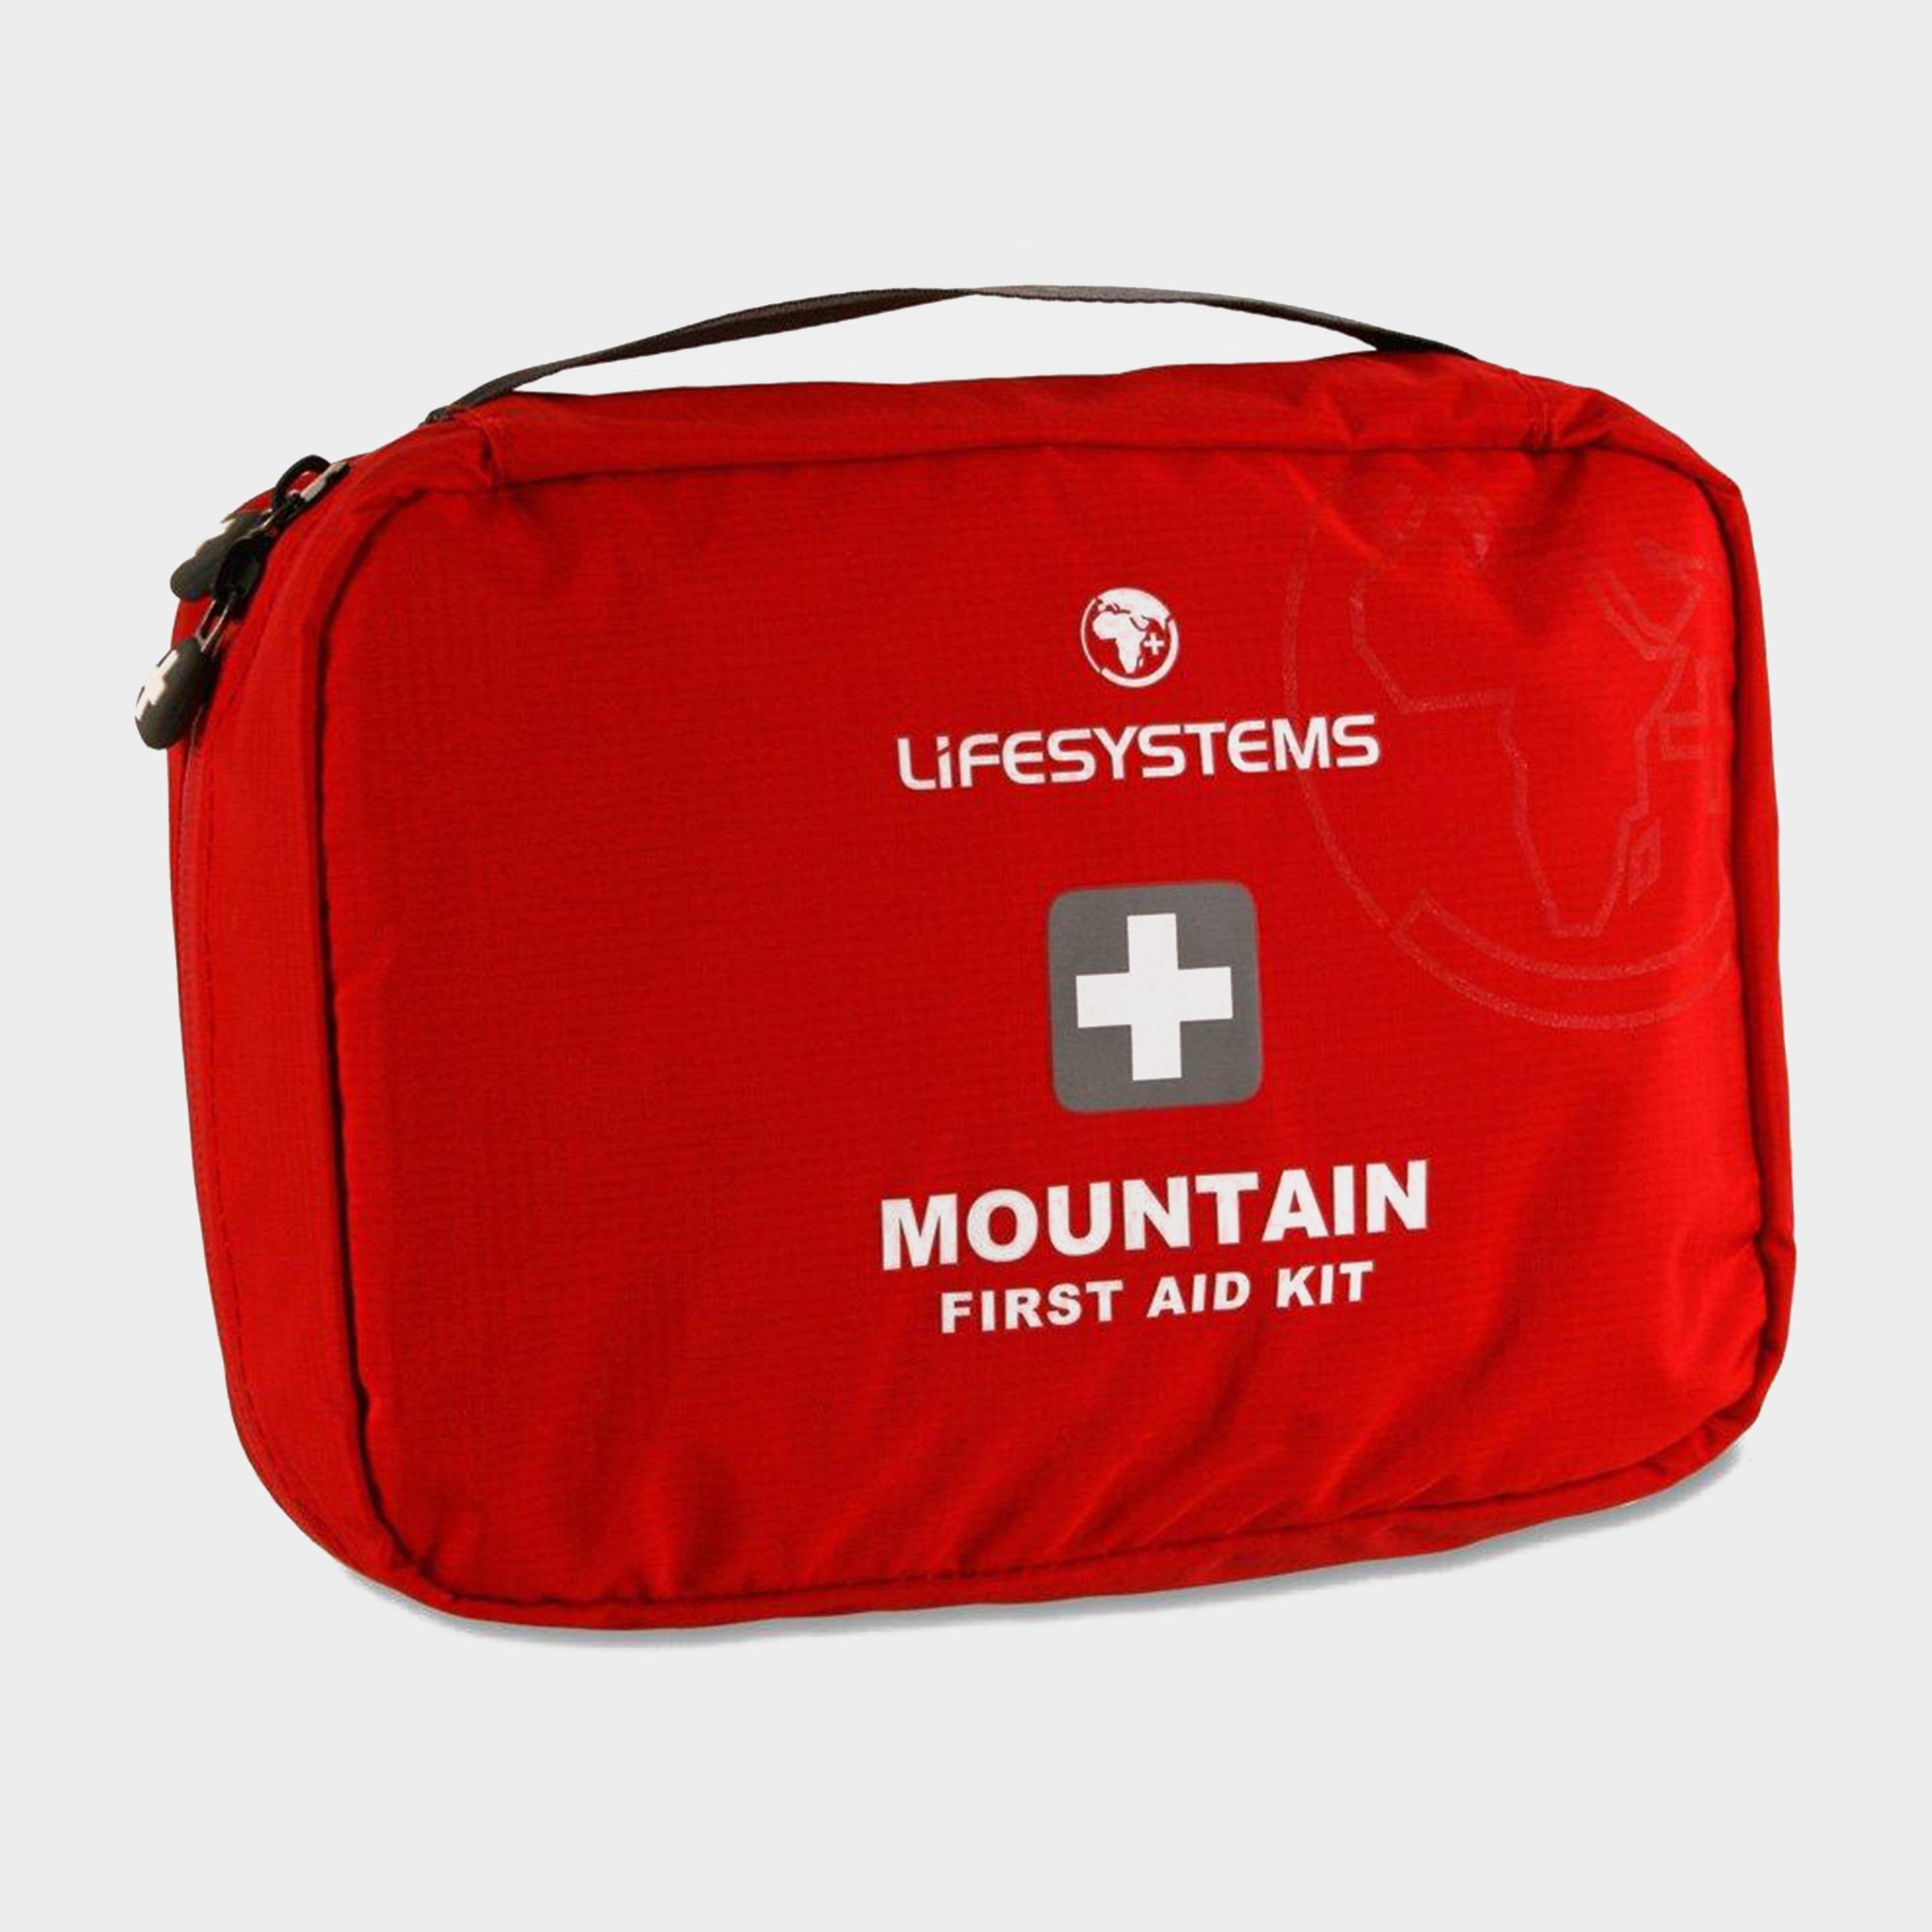 Lifesystems Lifesystems Ls Mountain First - Red, Red